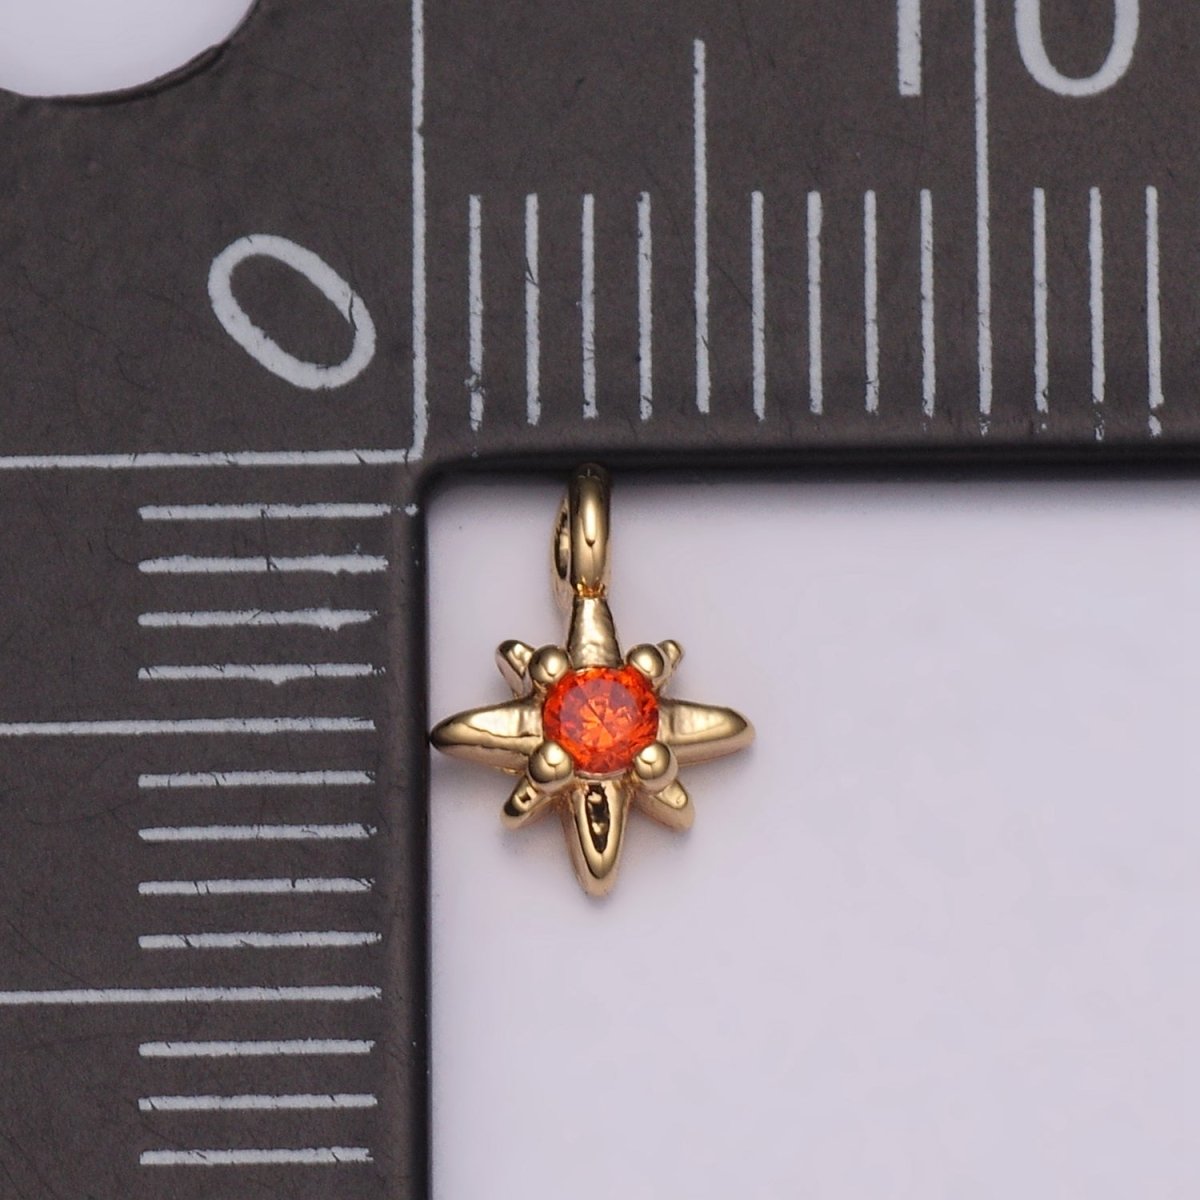 Tiny CZ 8 Point Star Cubic Zirconia Small Starburst North Star Pendant - 16K Gold Filled CZ Drop Charm Pendant, Celestial Jewelry, Pointed Star N-165 - N-169 - DLUXCA